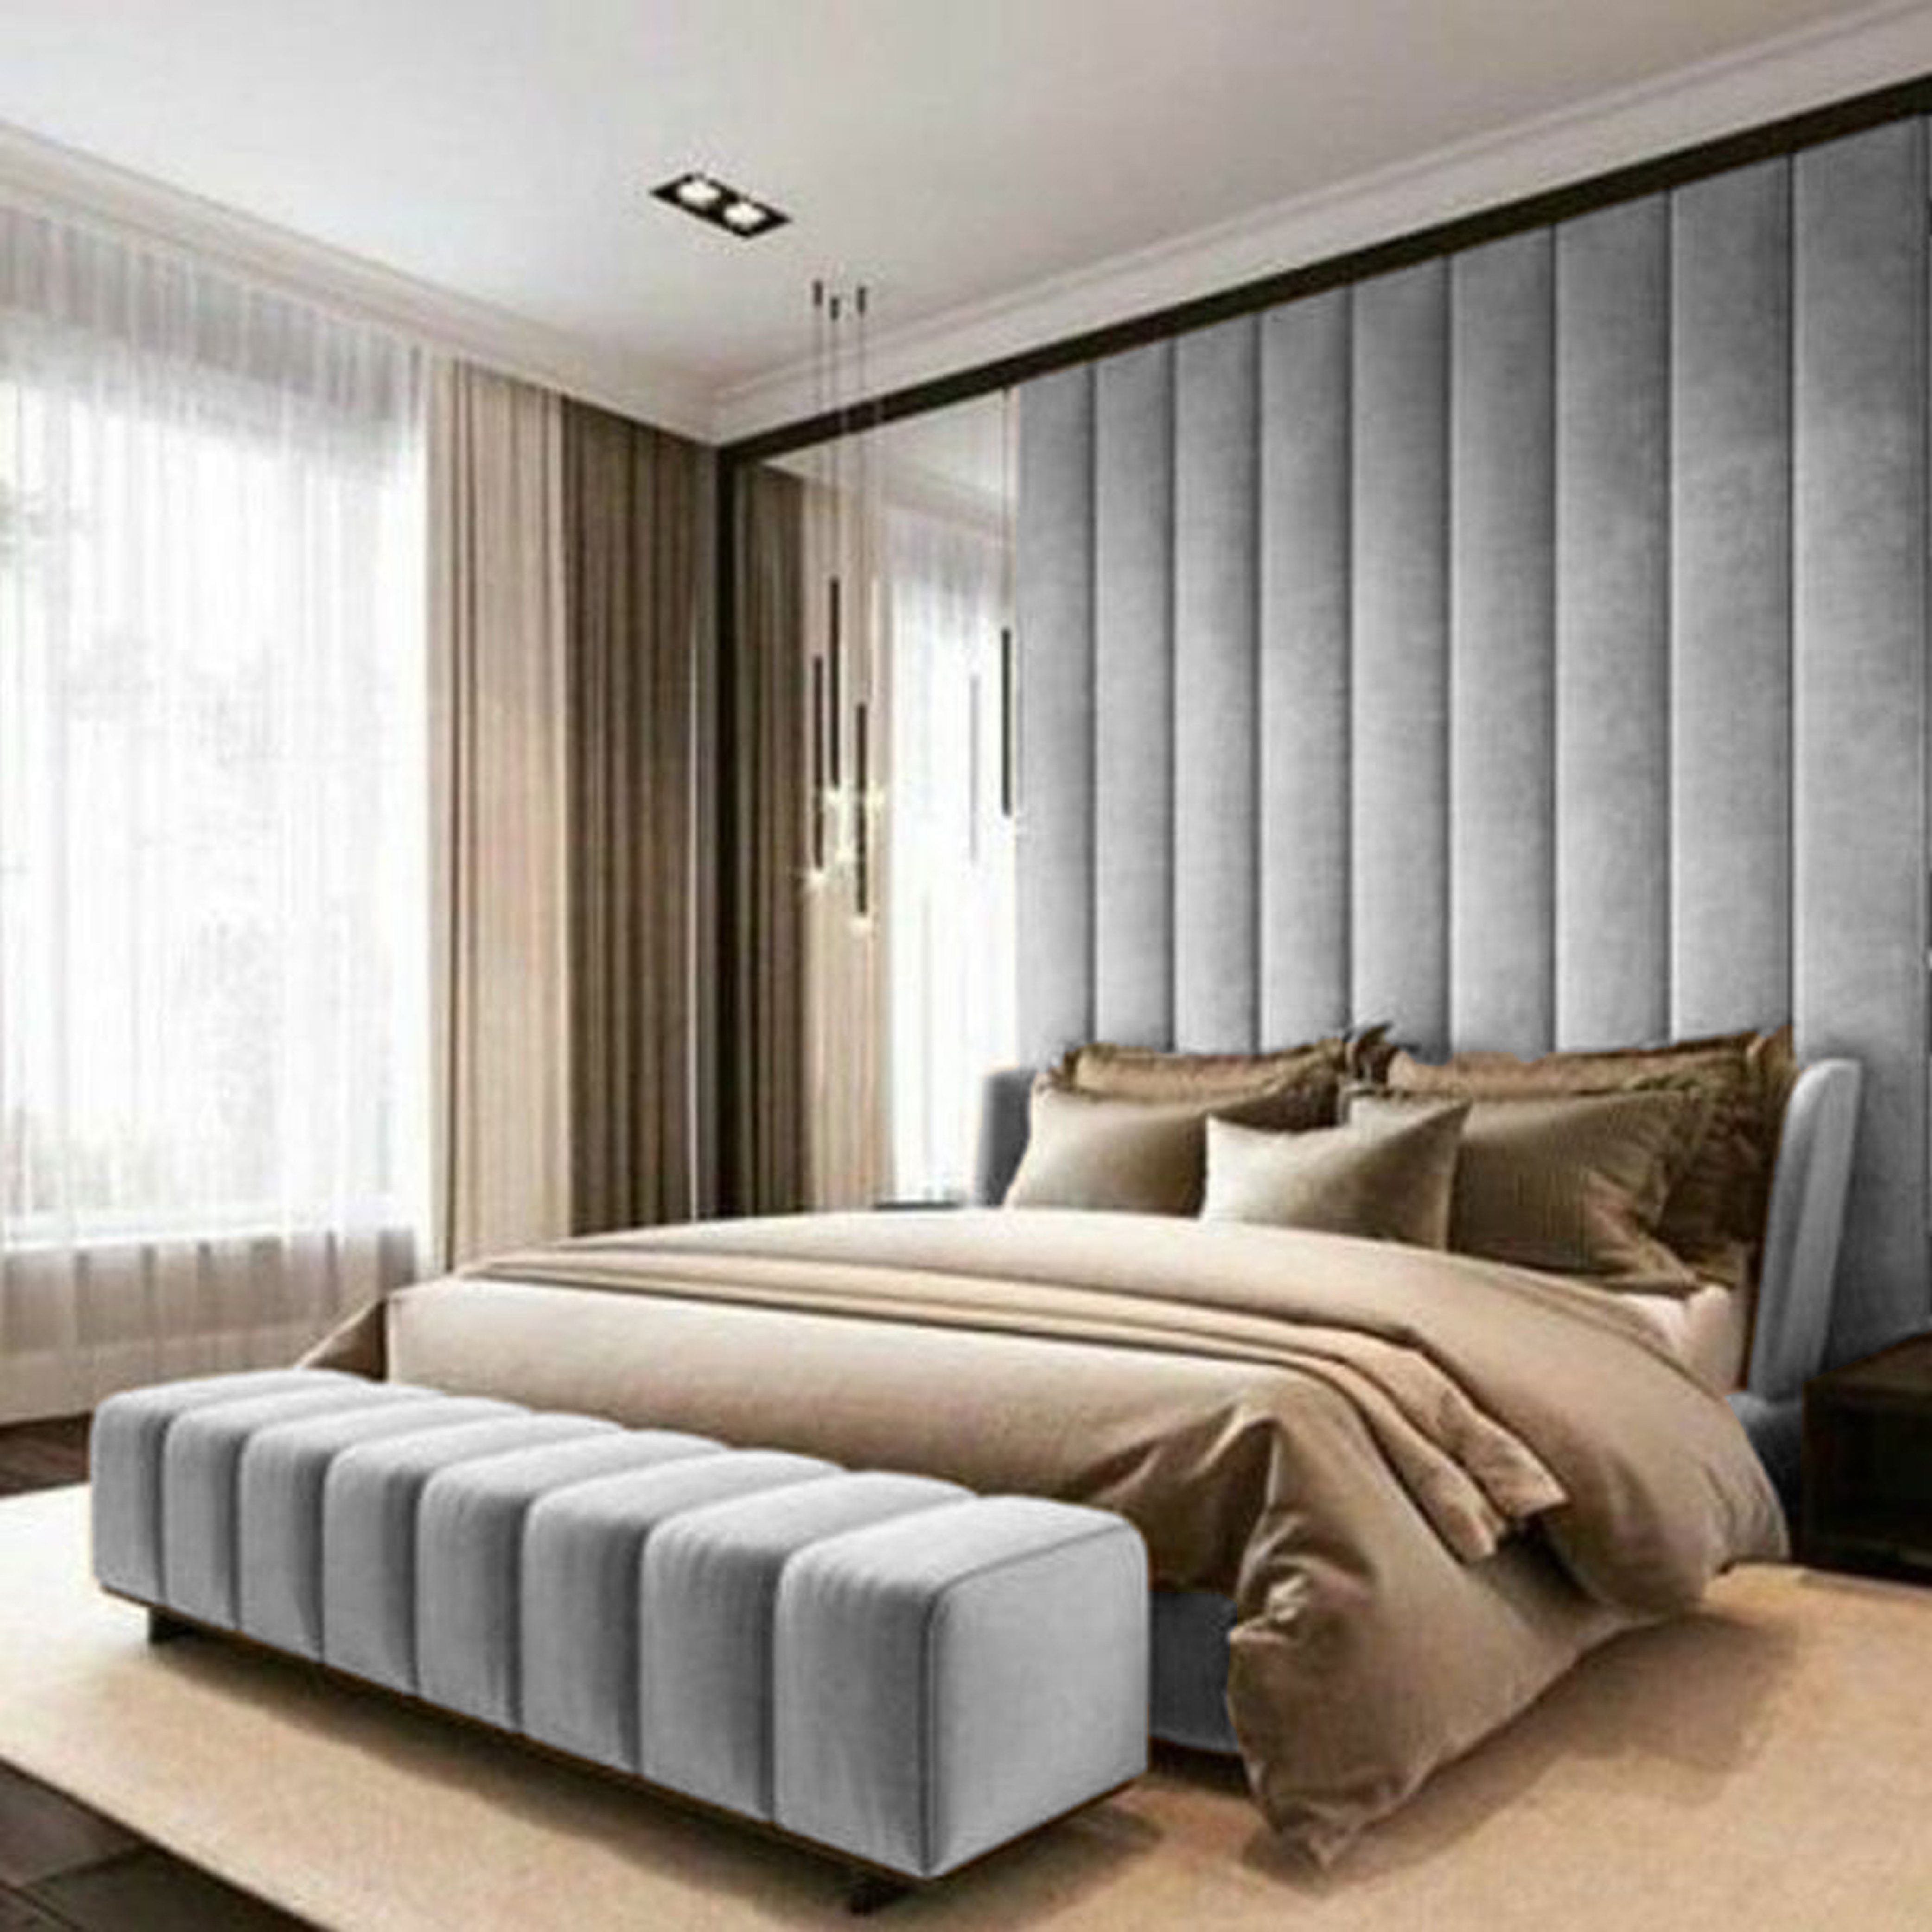 Channel Upholstered Wall Panel Headboard Bed